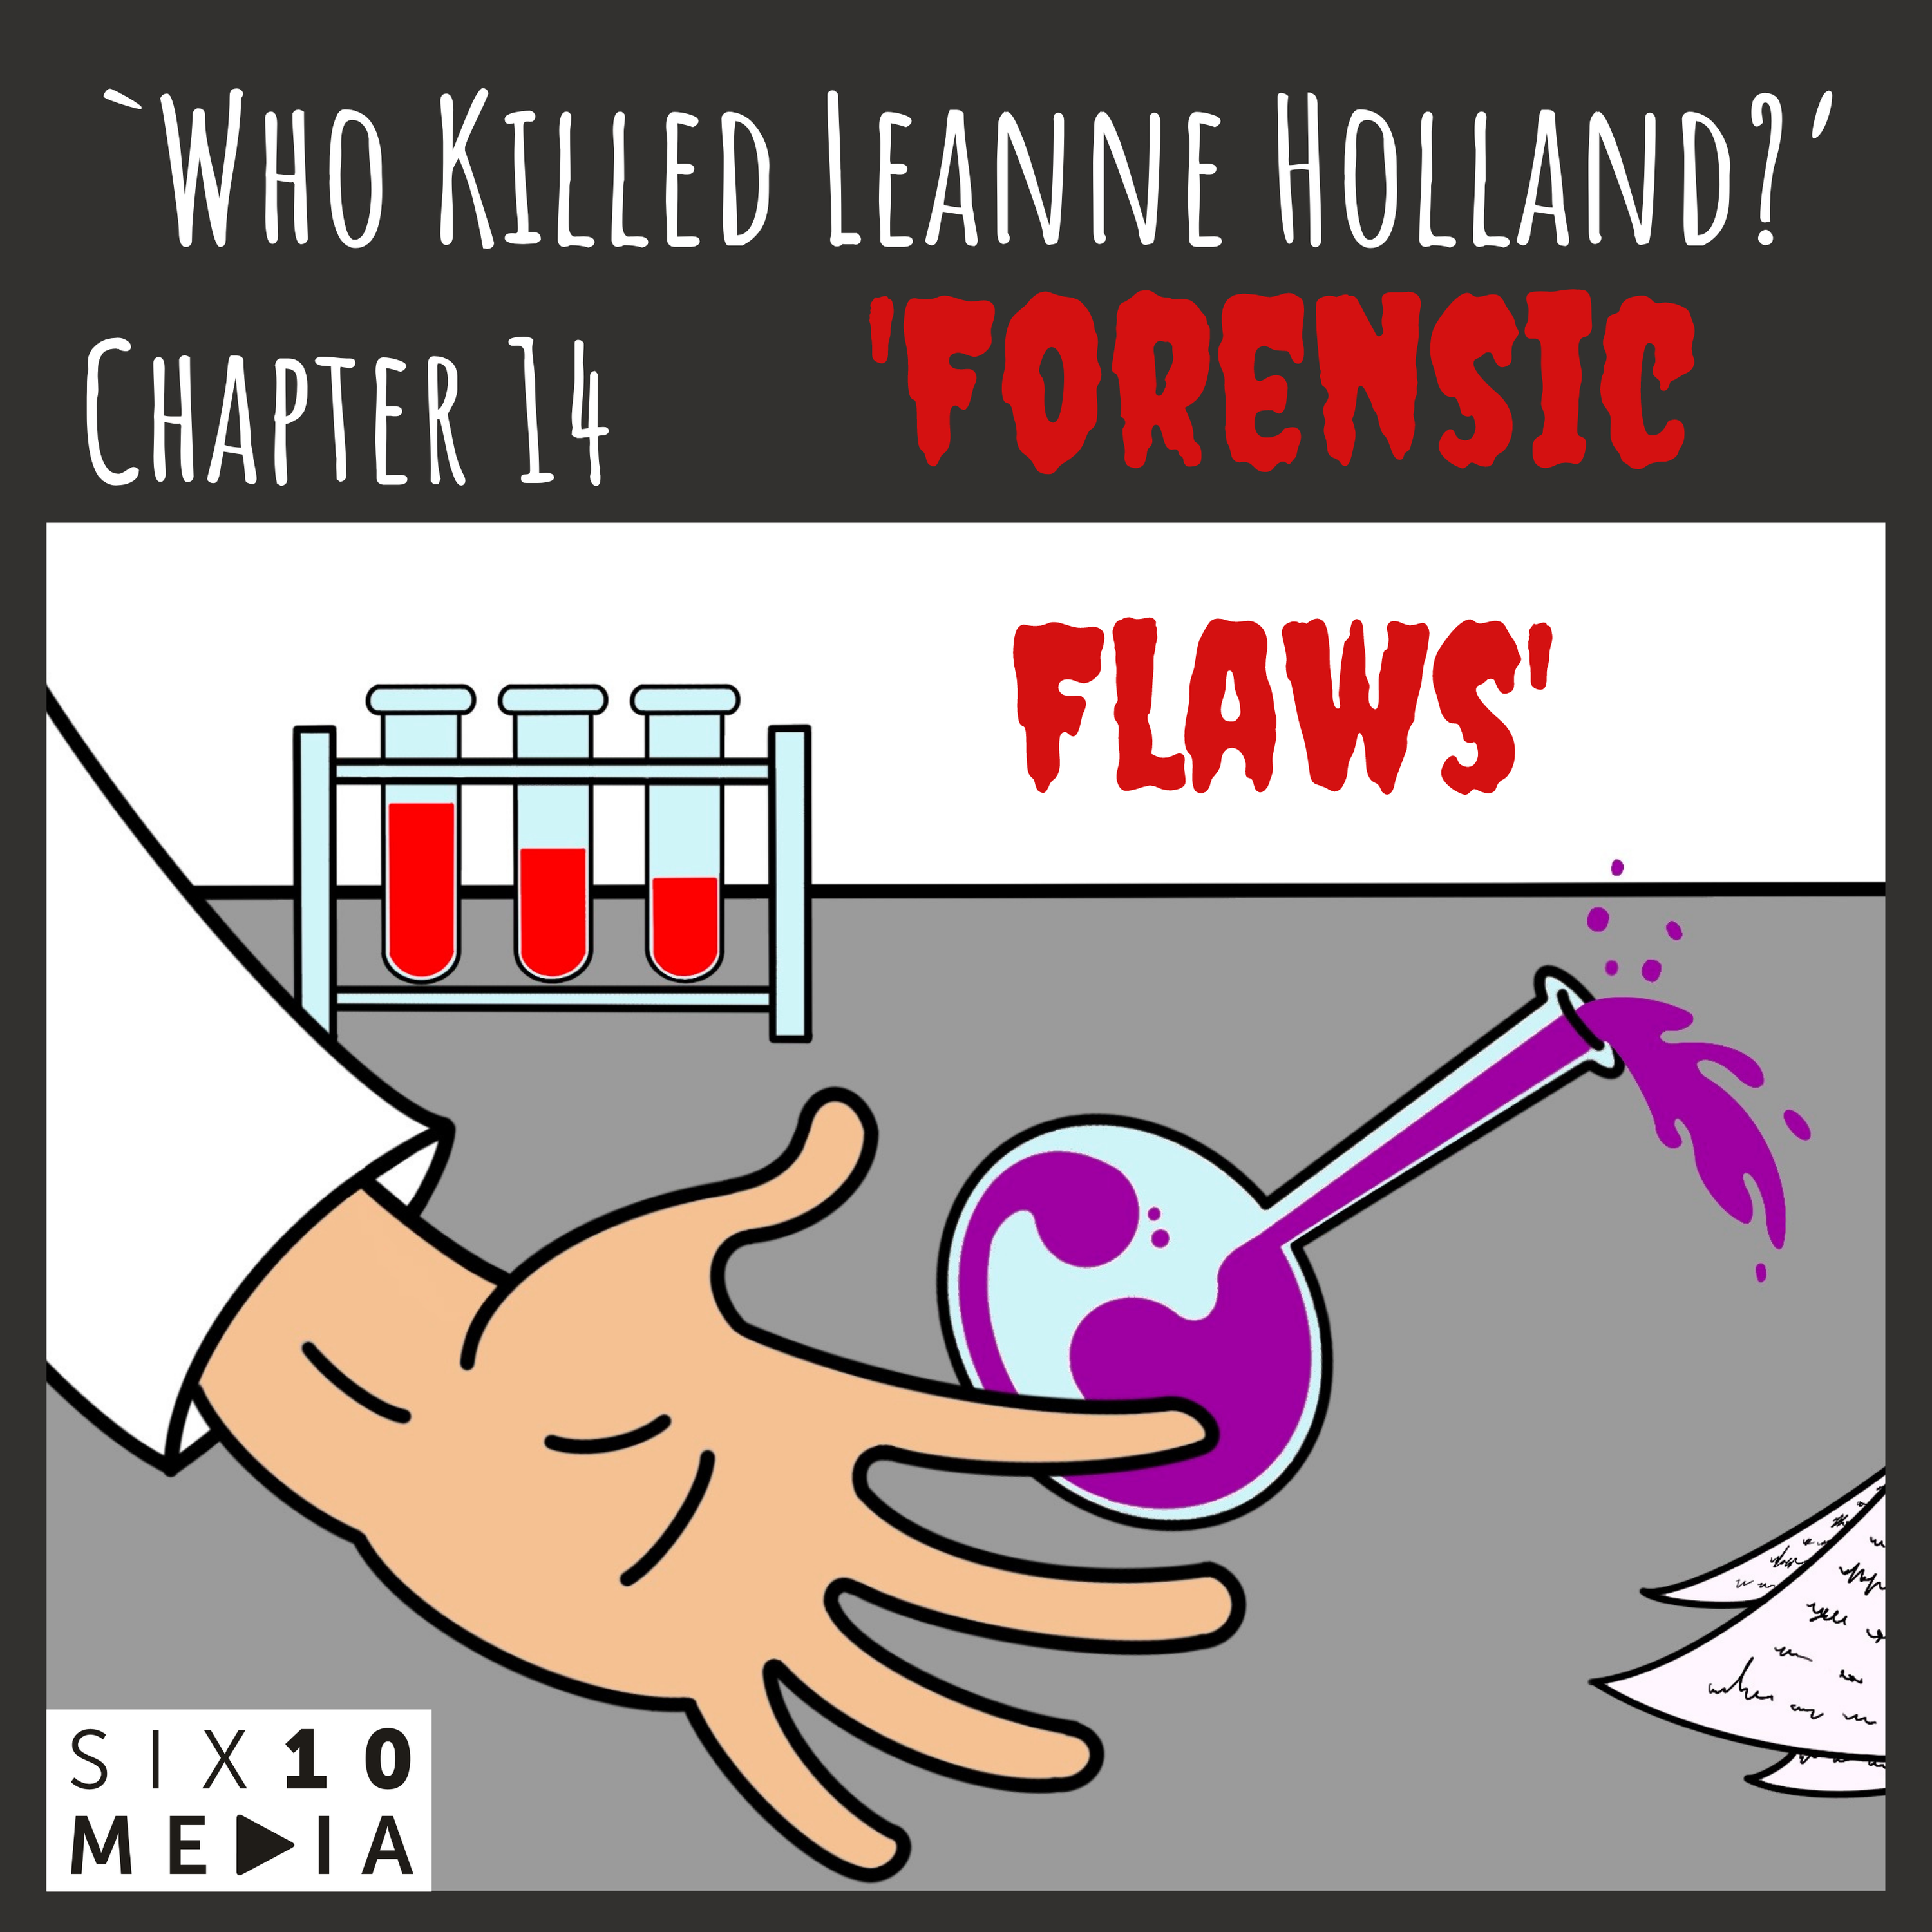 'Forensic Flaws'